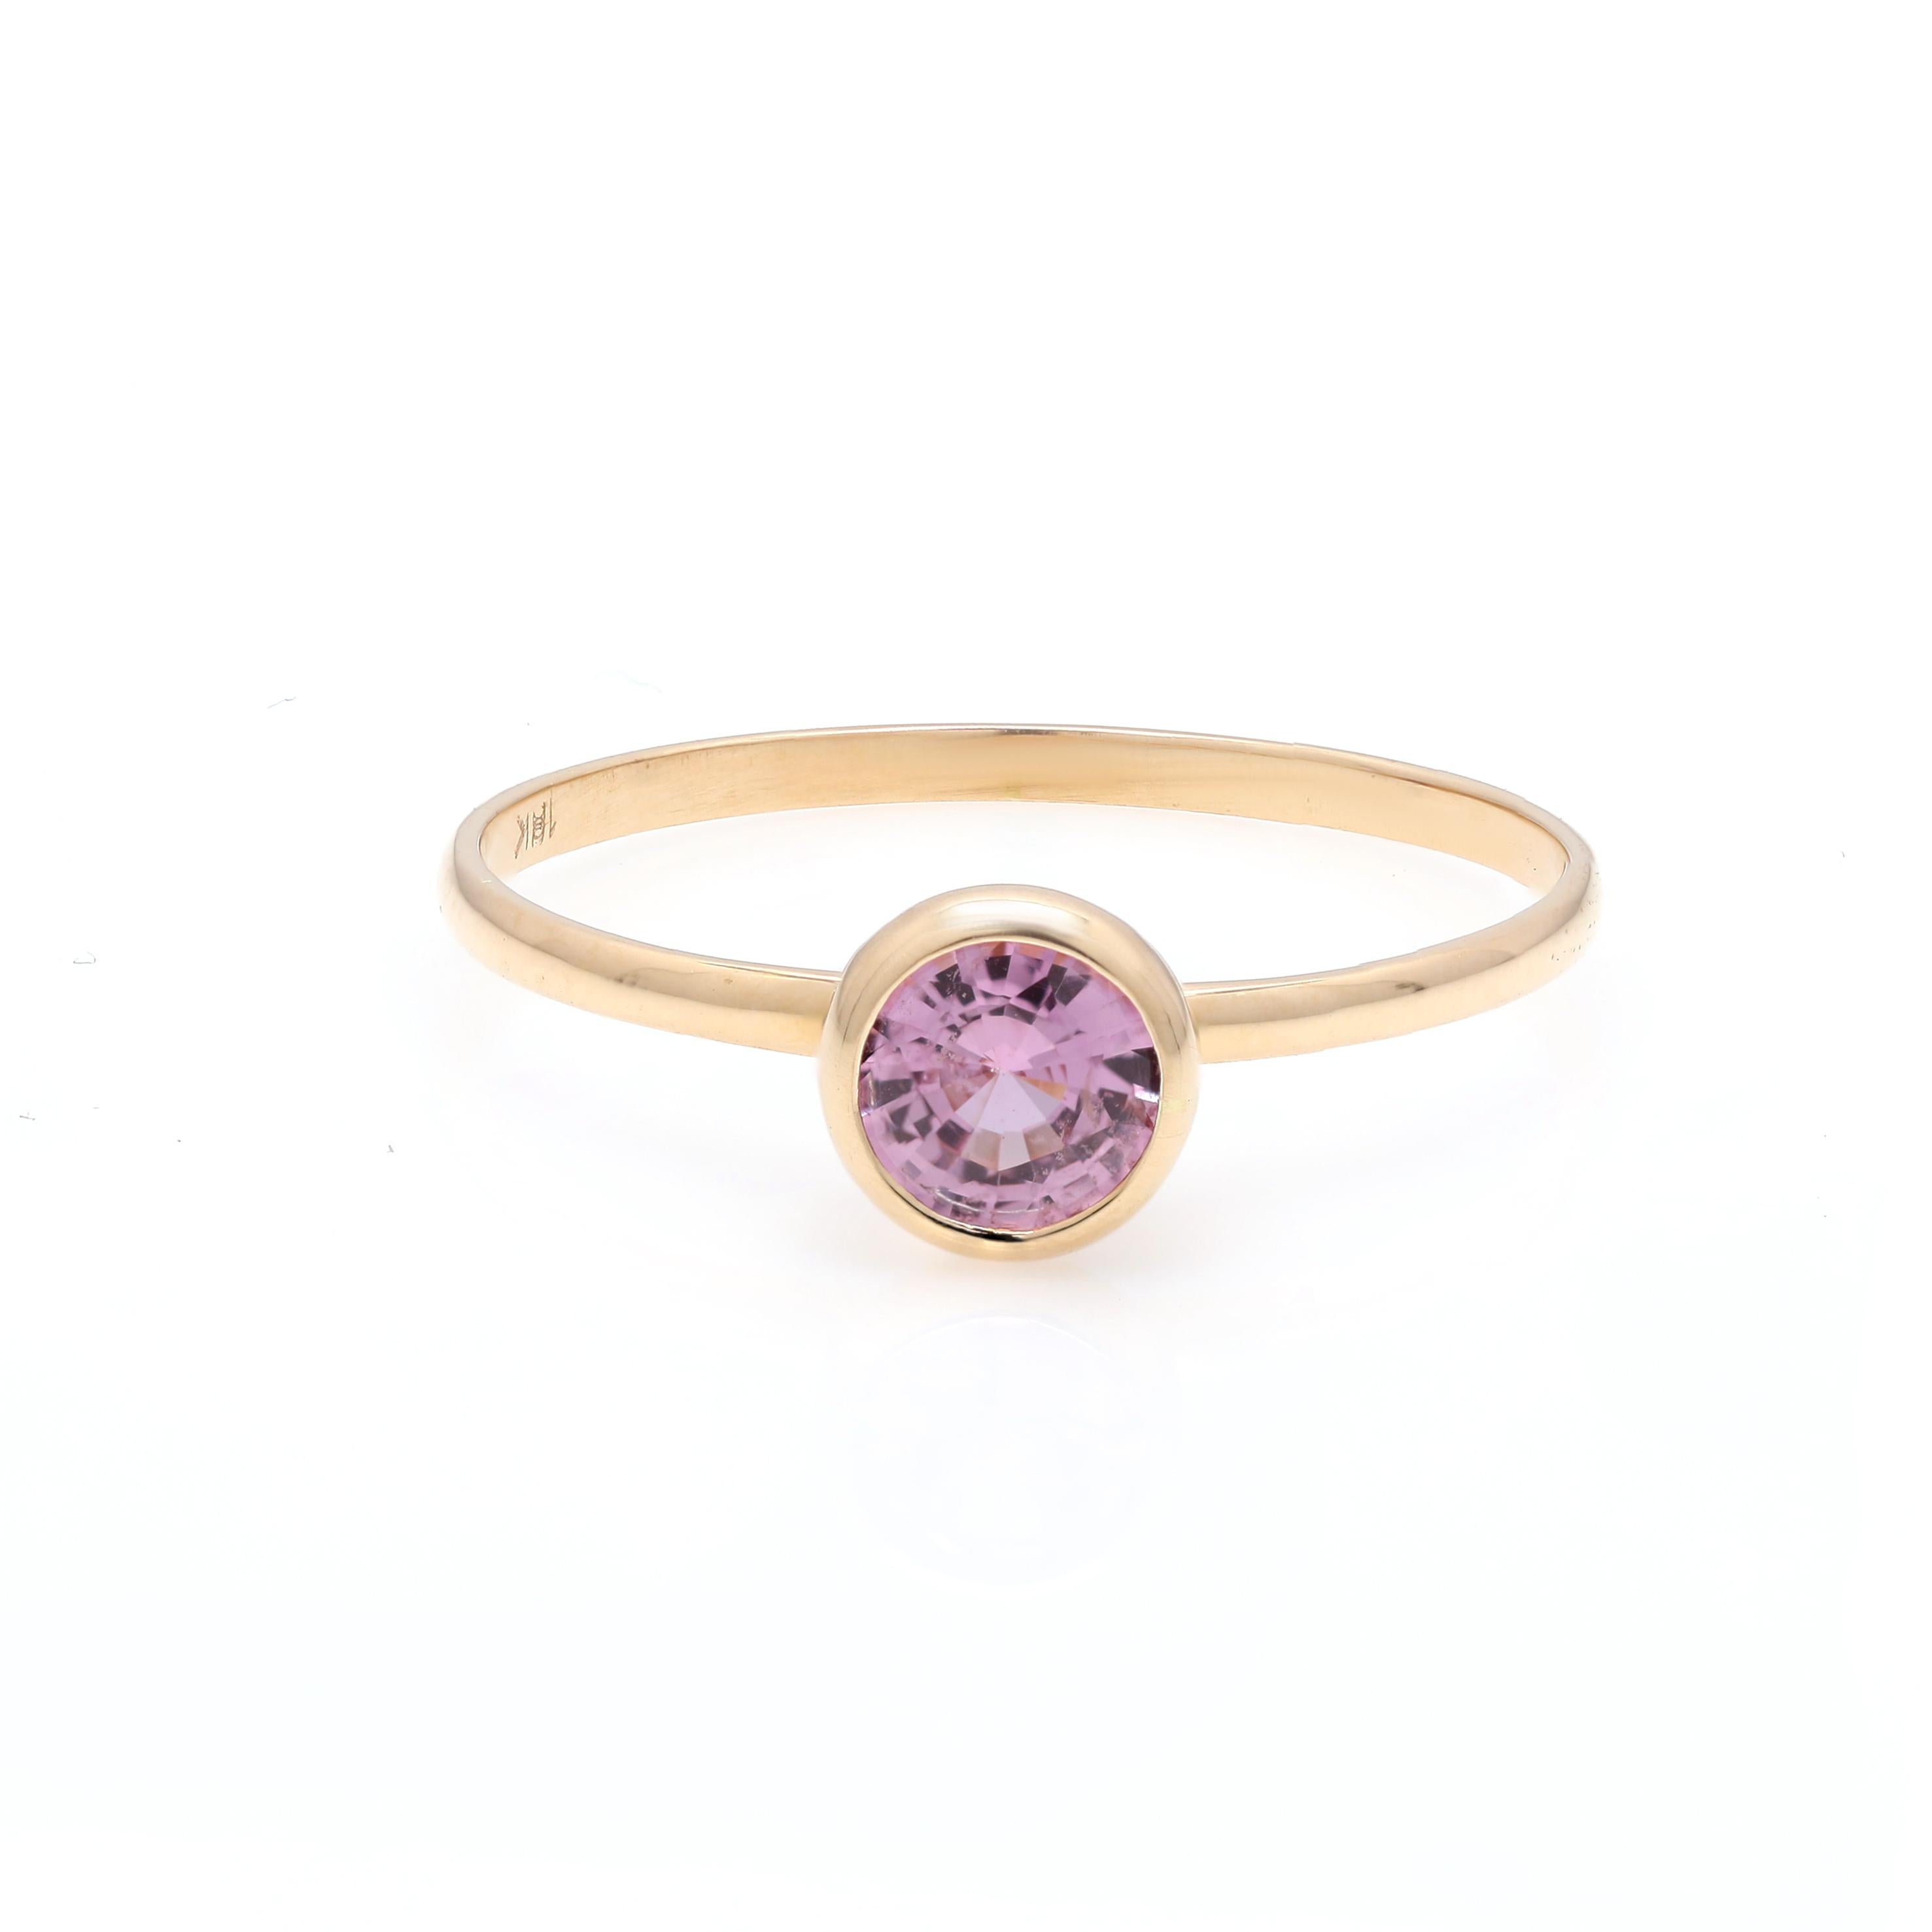 For Sale:  Solid 18k Yellow Gold Genuine Pink Sapphire Ring, Dainty Sapphire Ring for Her 3